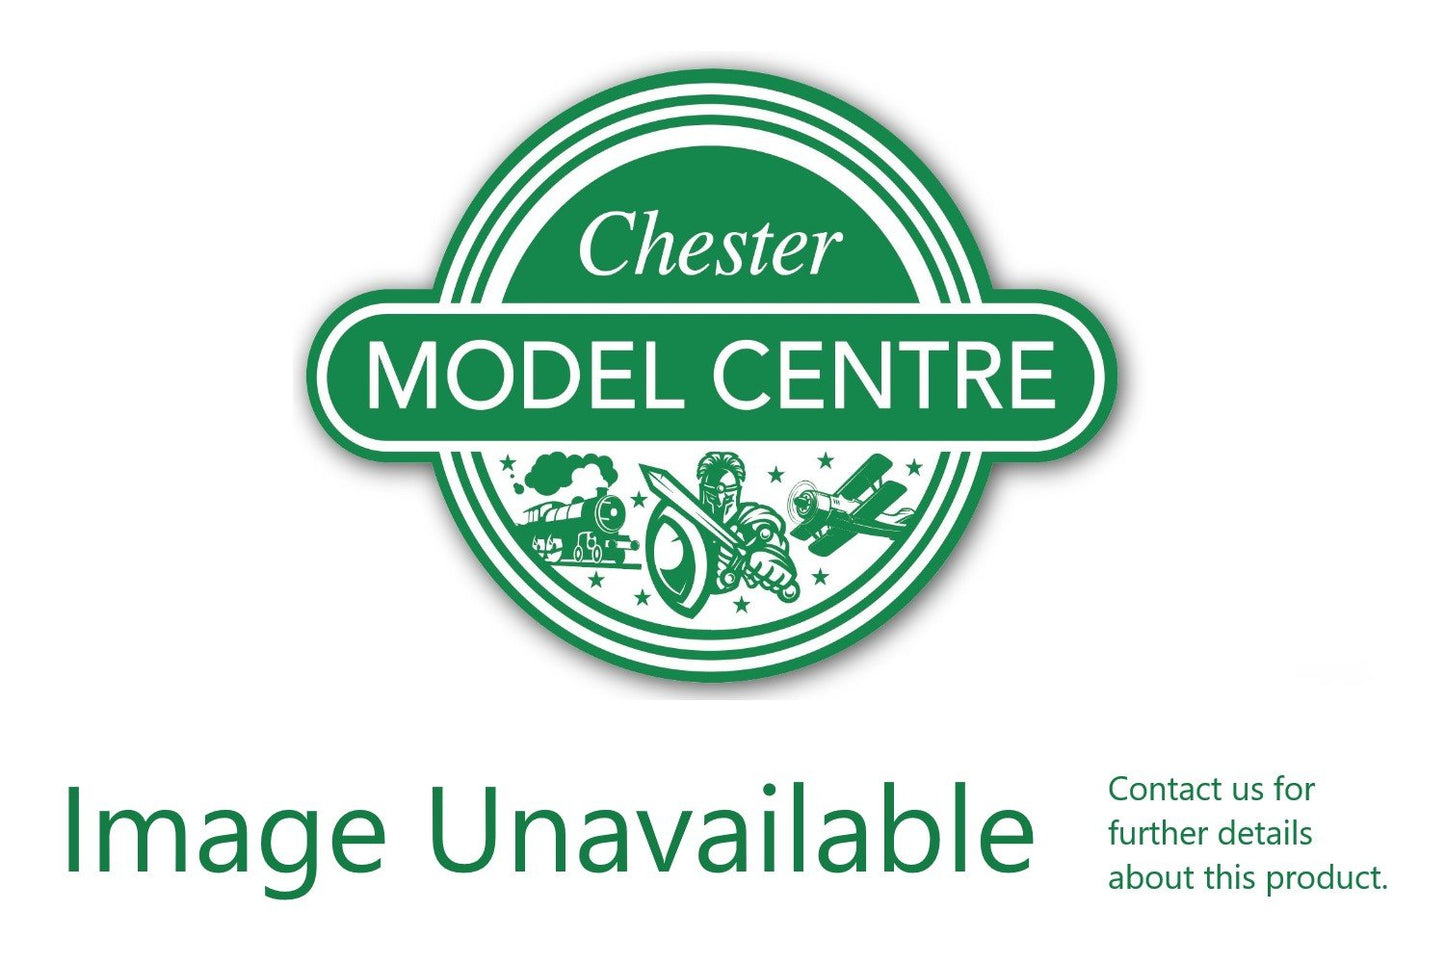 Urban Camouflage Netting 1M - Chester Model Centre